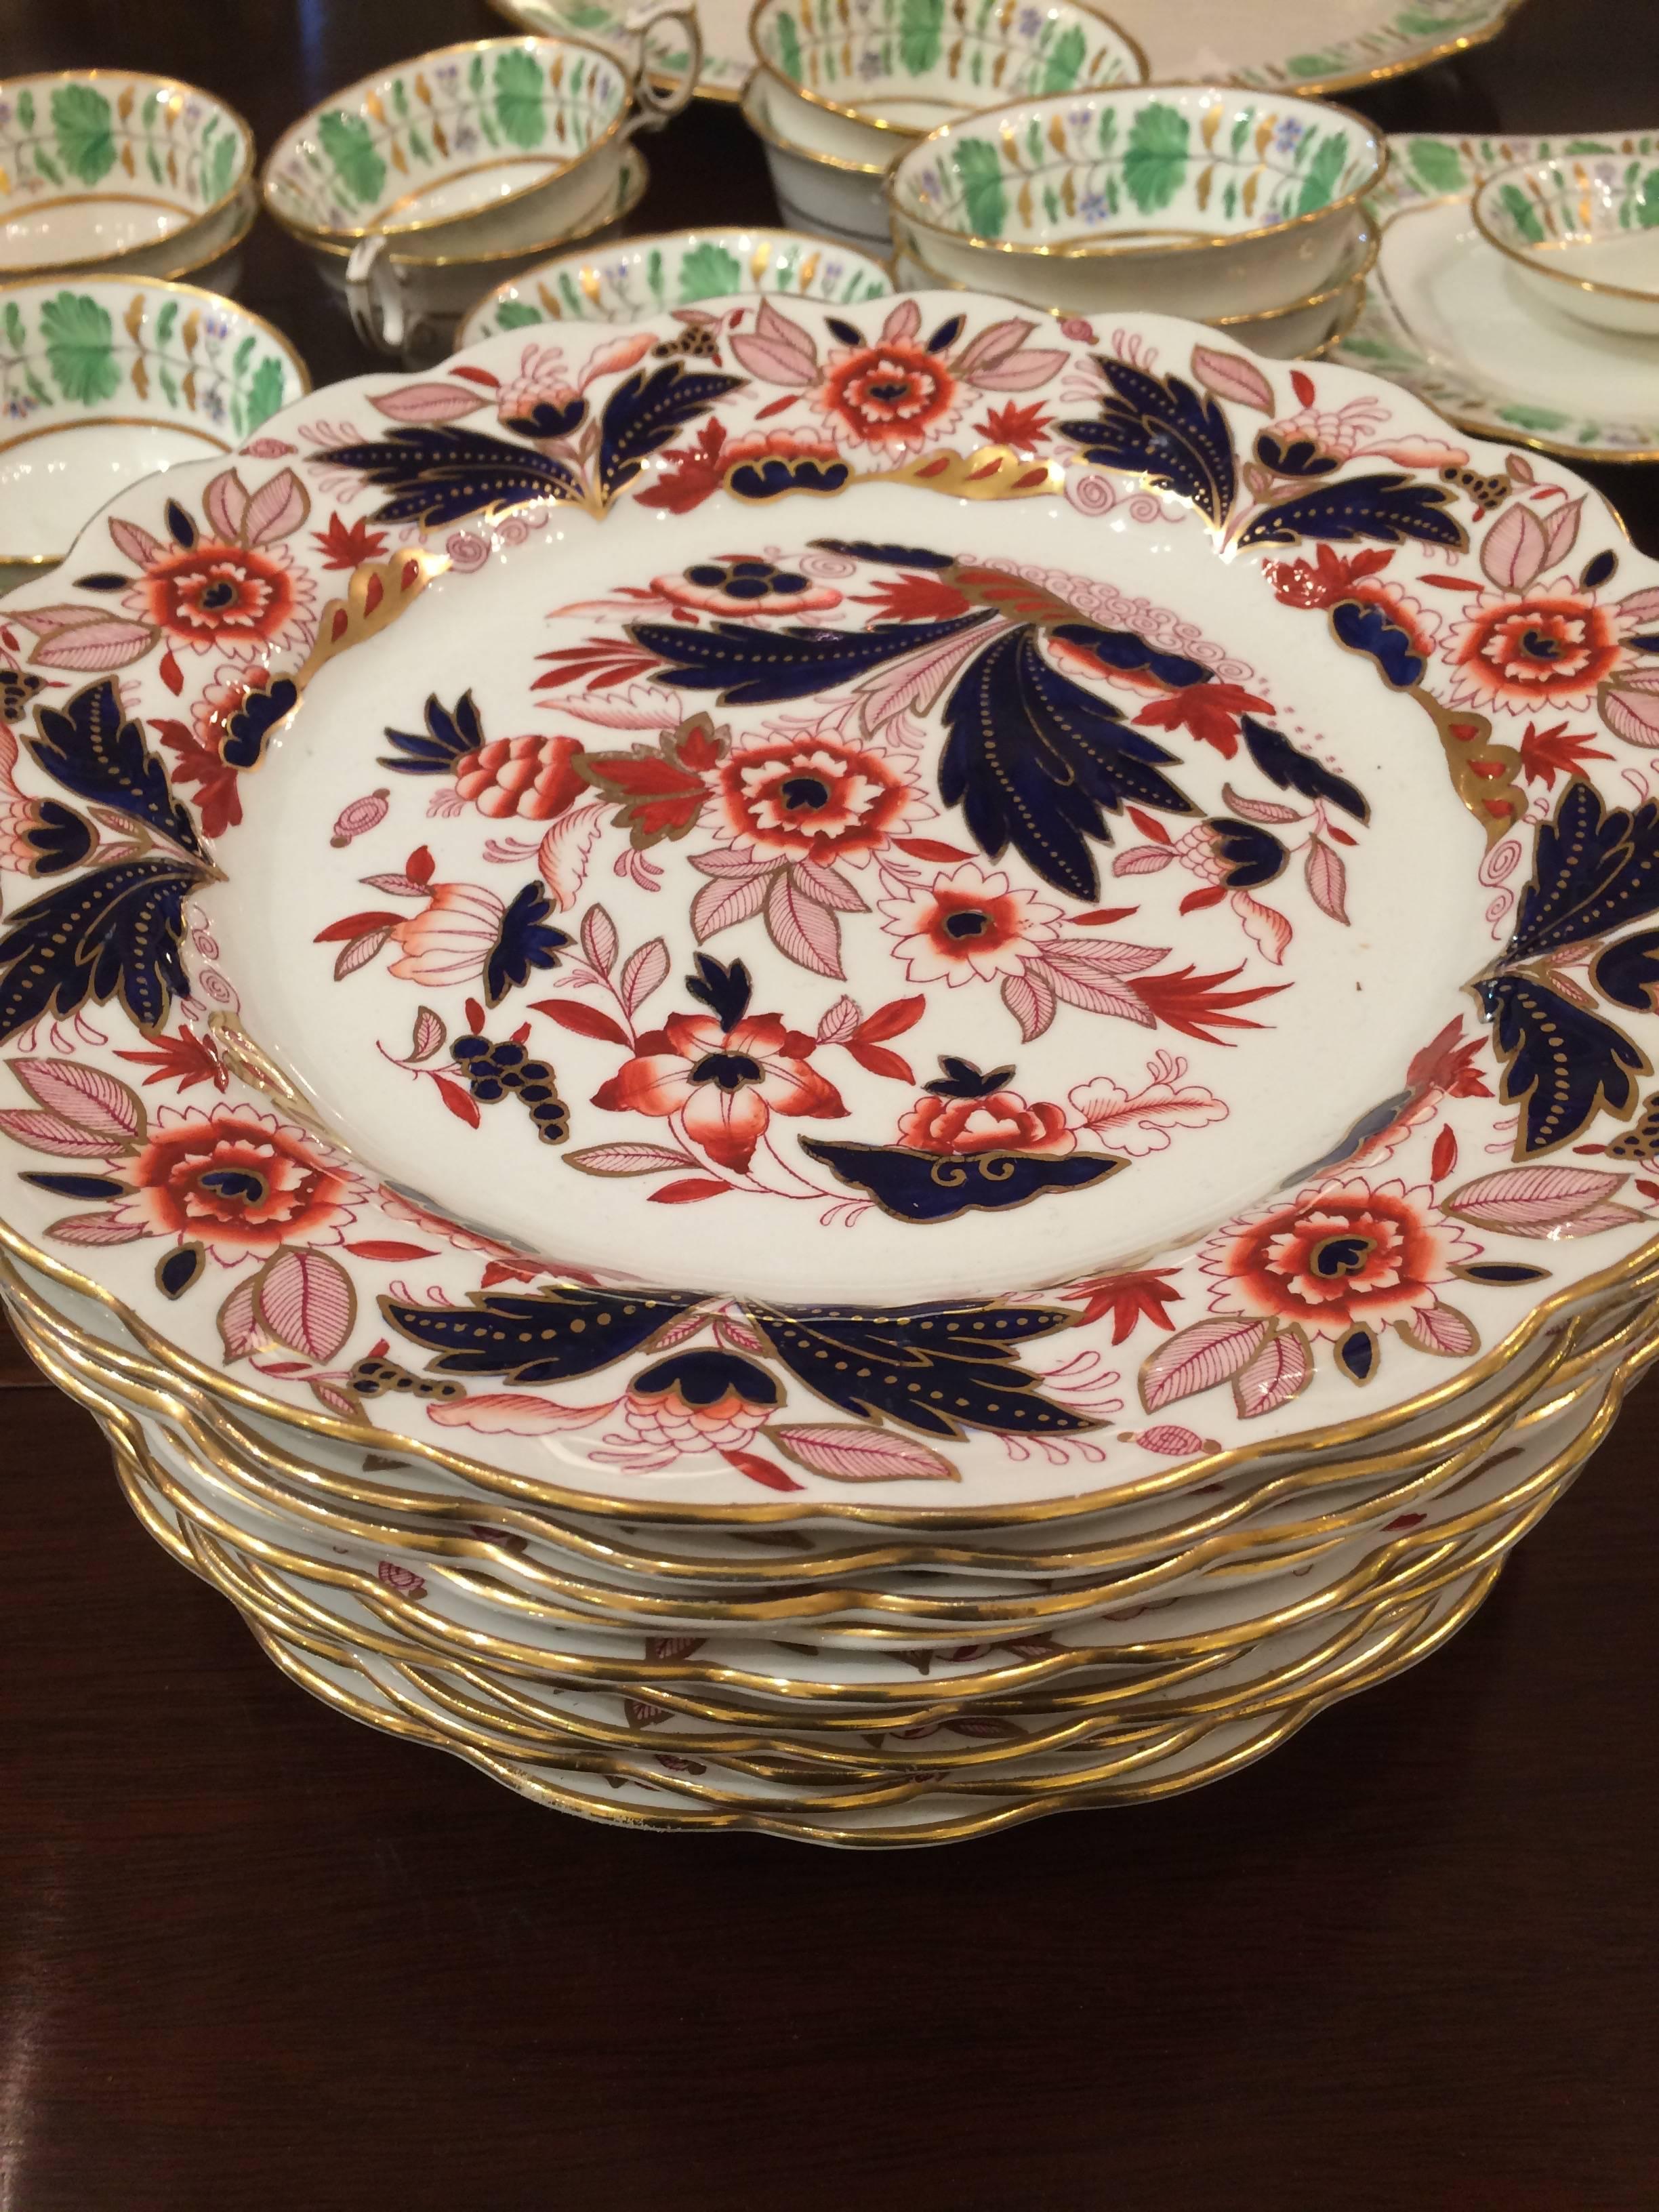 Magnificent Imari style English antique dinner plates in a gorgeous rich color palette of navy, red oxide and gold against a white background and having scallped edges.
Says Made In England, Booths Dovetail on reverse.